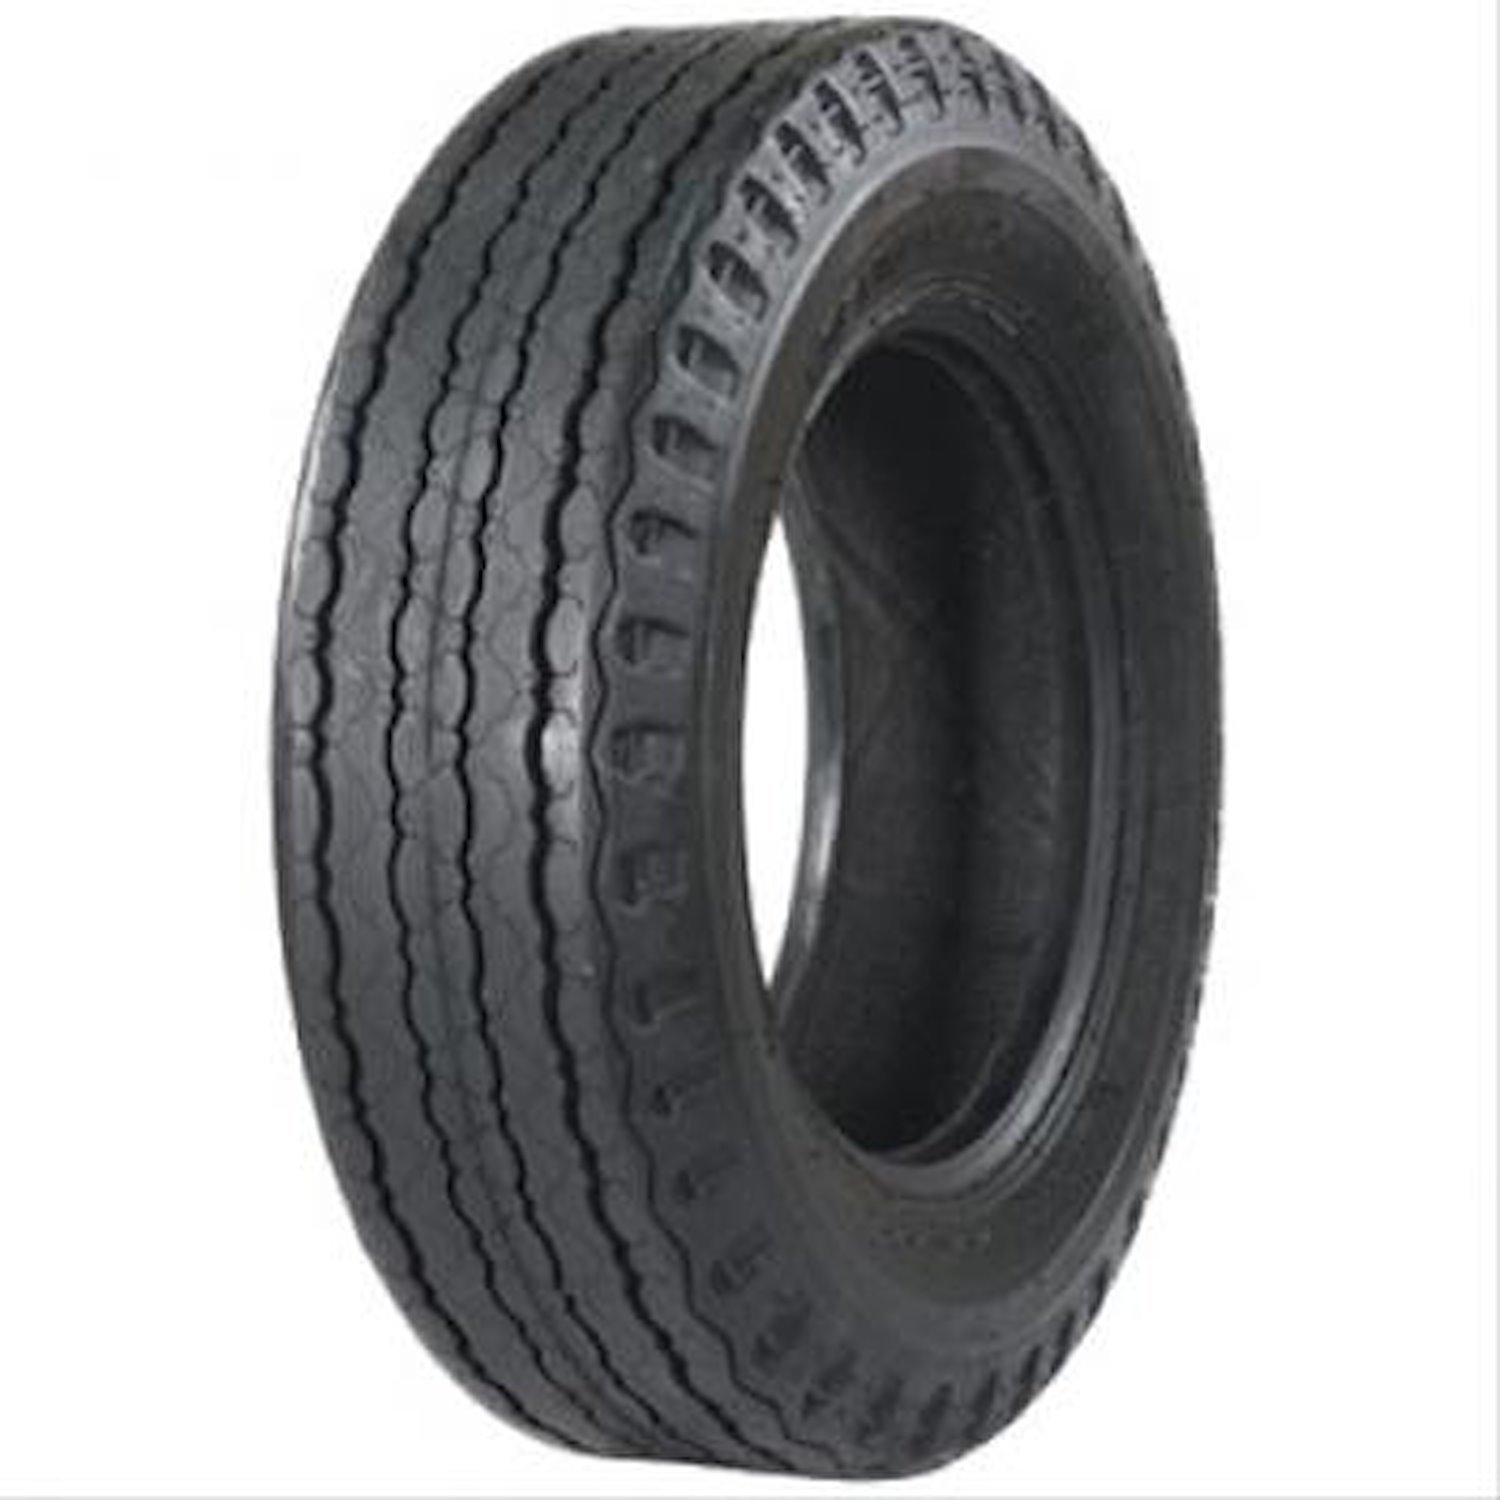 71013 Tire, Tornel Highway, 10-Ply, 750-17